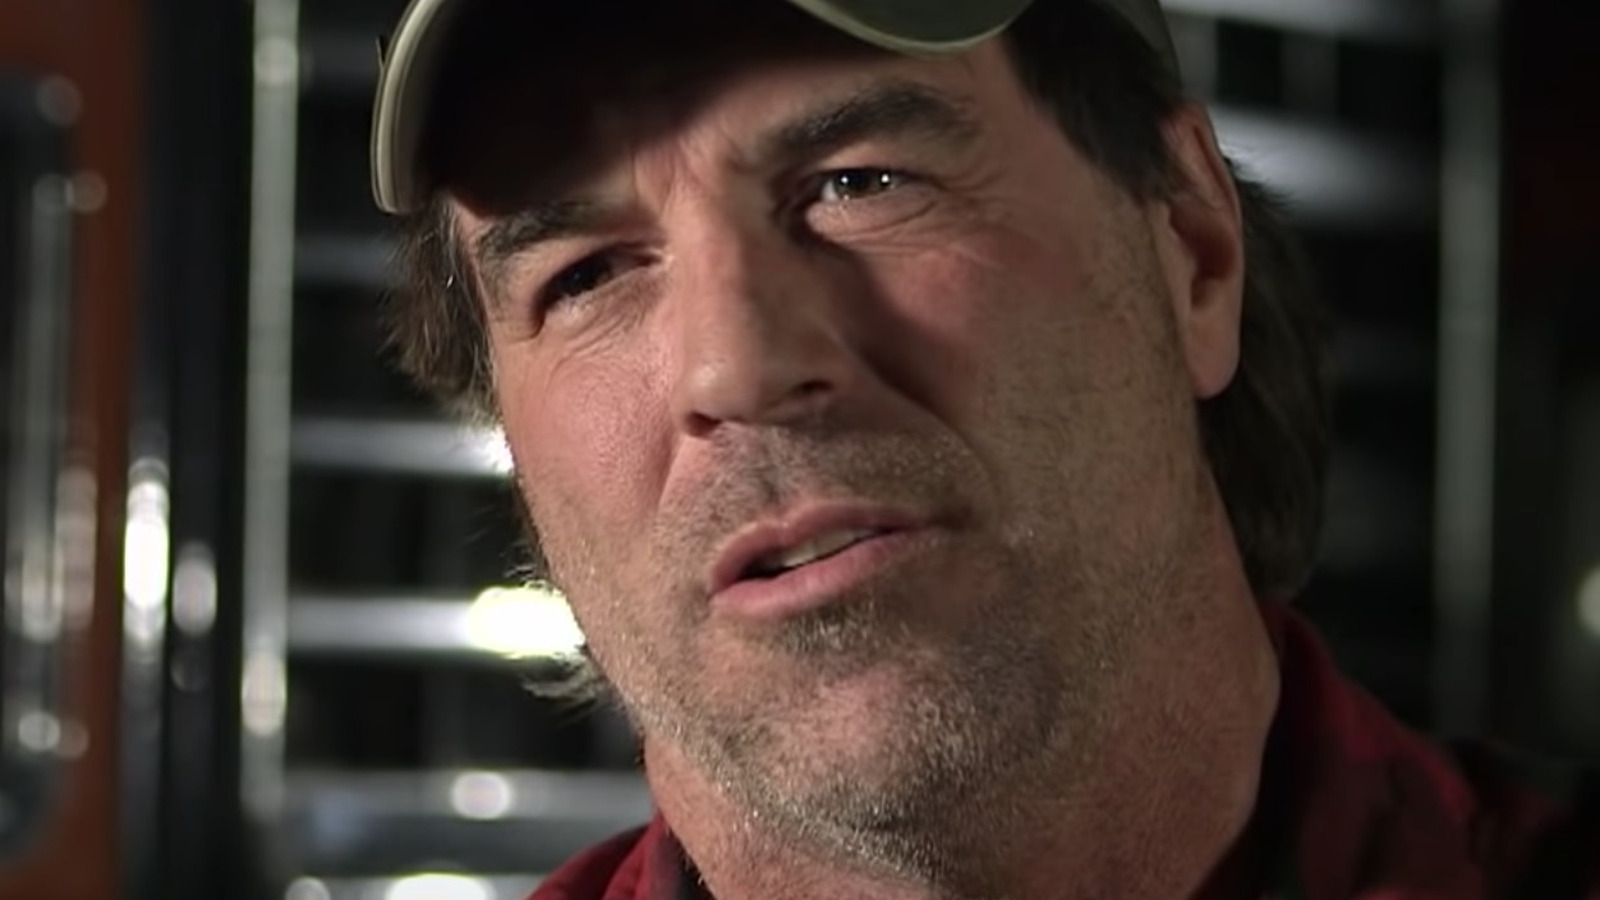 This Is The Moment Ice Road Truckers' Darrell Ward Knew He Wanted To Become  A Truck Driver